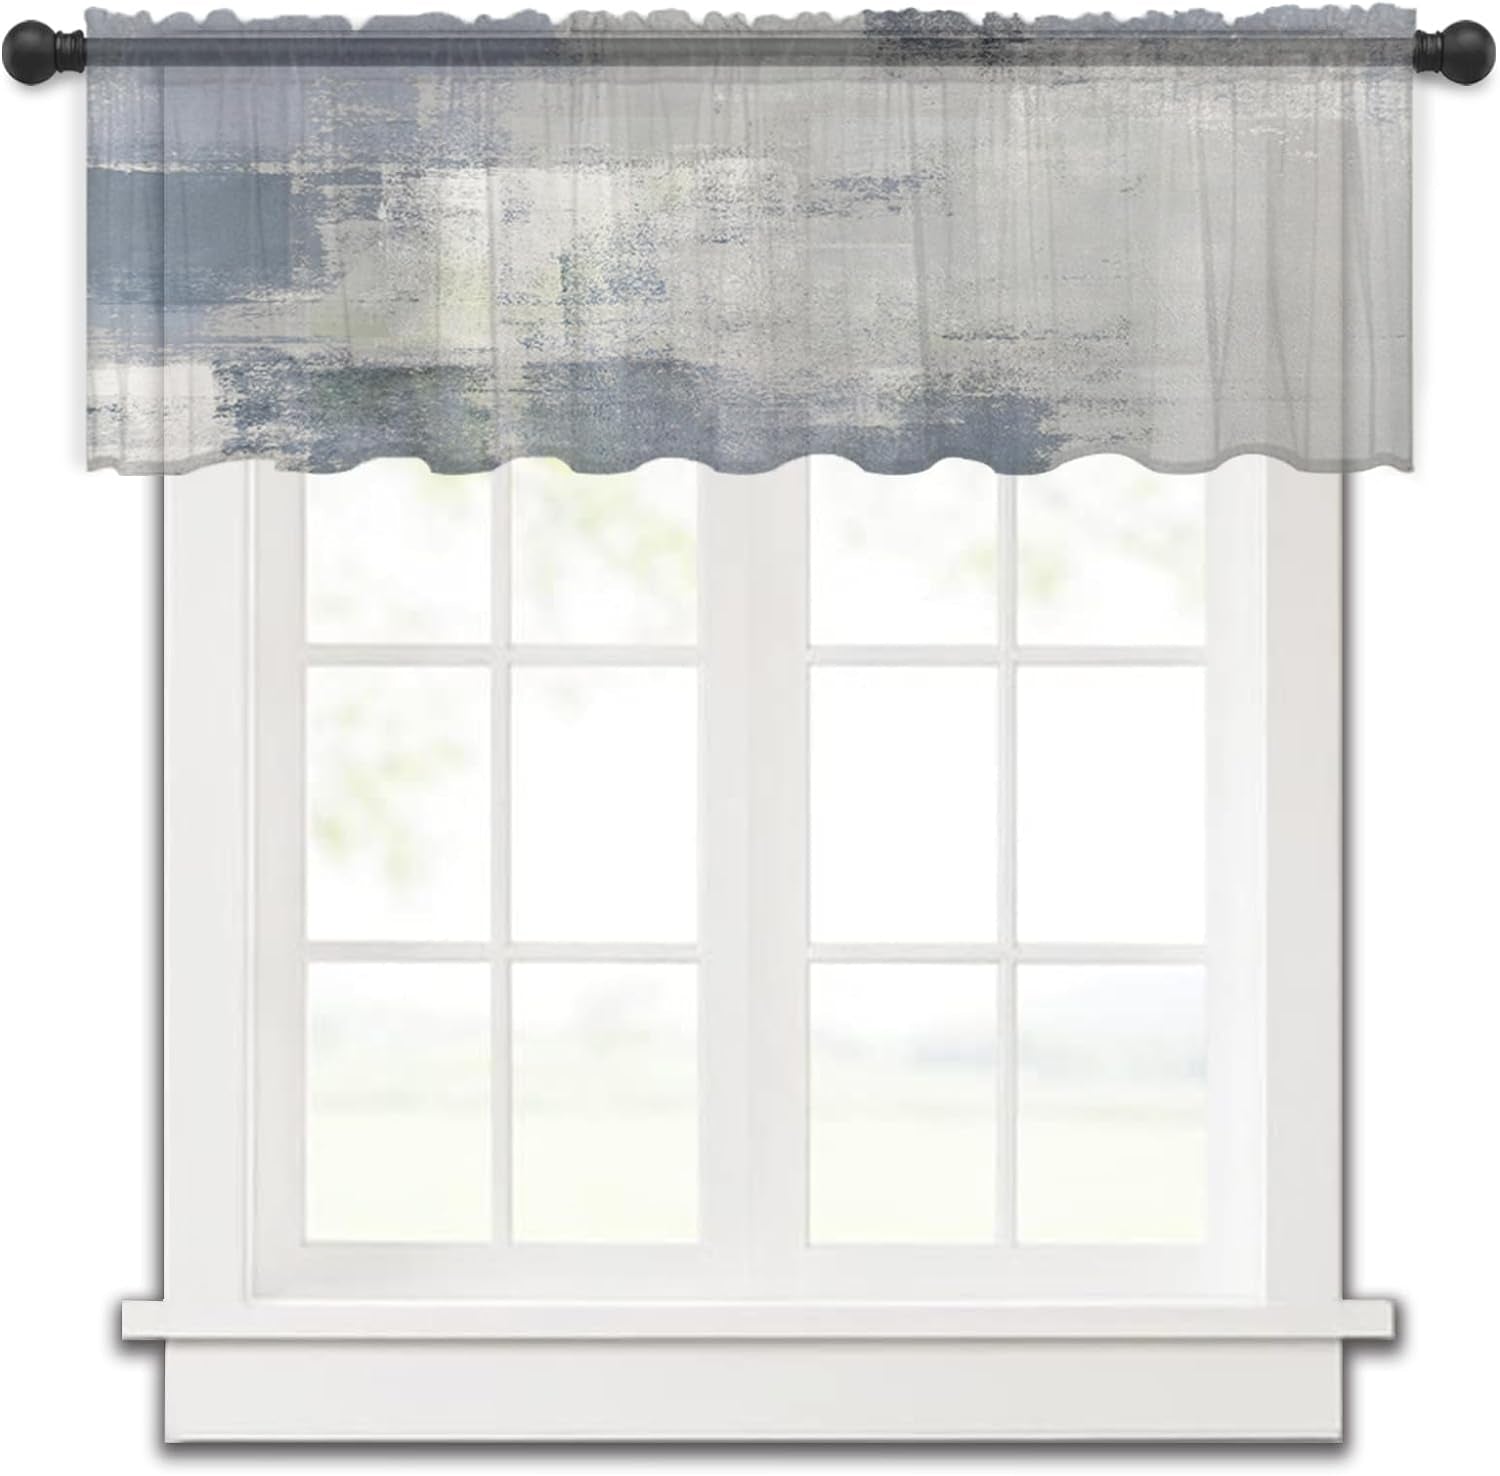 Abstract Valance Curtains for Kitchen/Living Room/Bathroom/Bedroom Window,Rod Pocket Small Topper Half Short Window Curtains Voile Sheer Scarf, Modern Blue Grey Oil Paintng Aesthetics Art 54"X18"